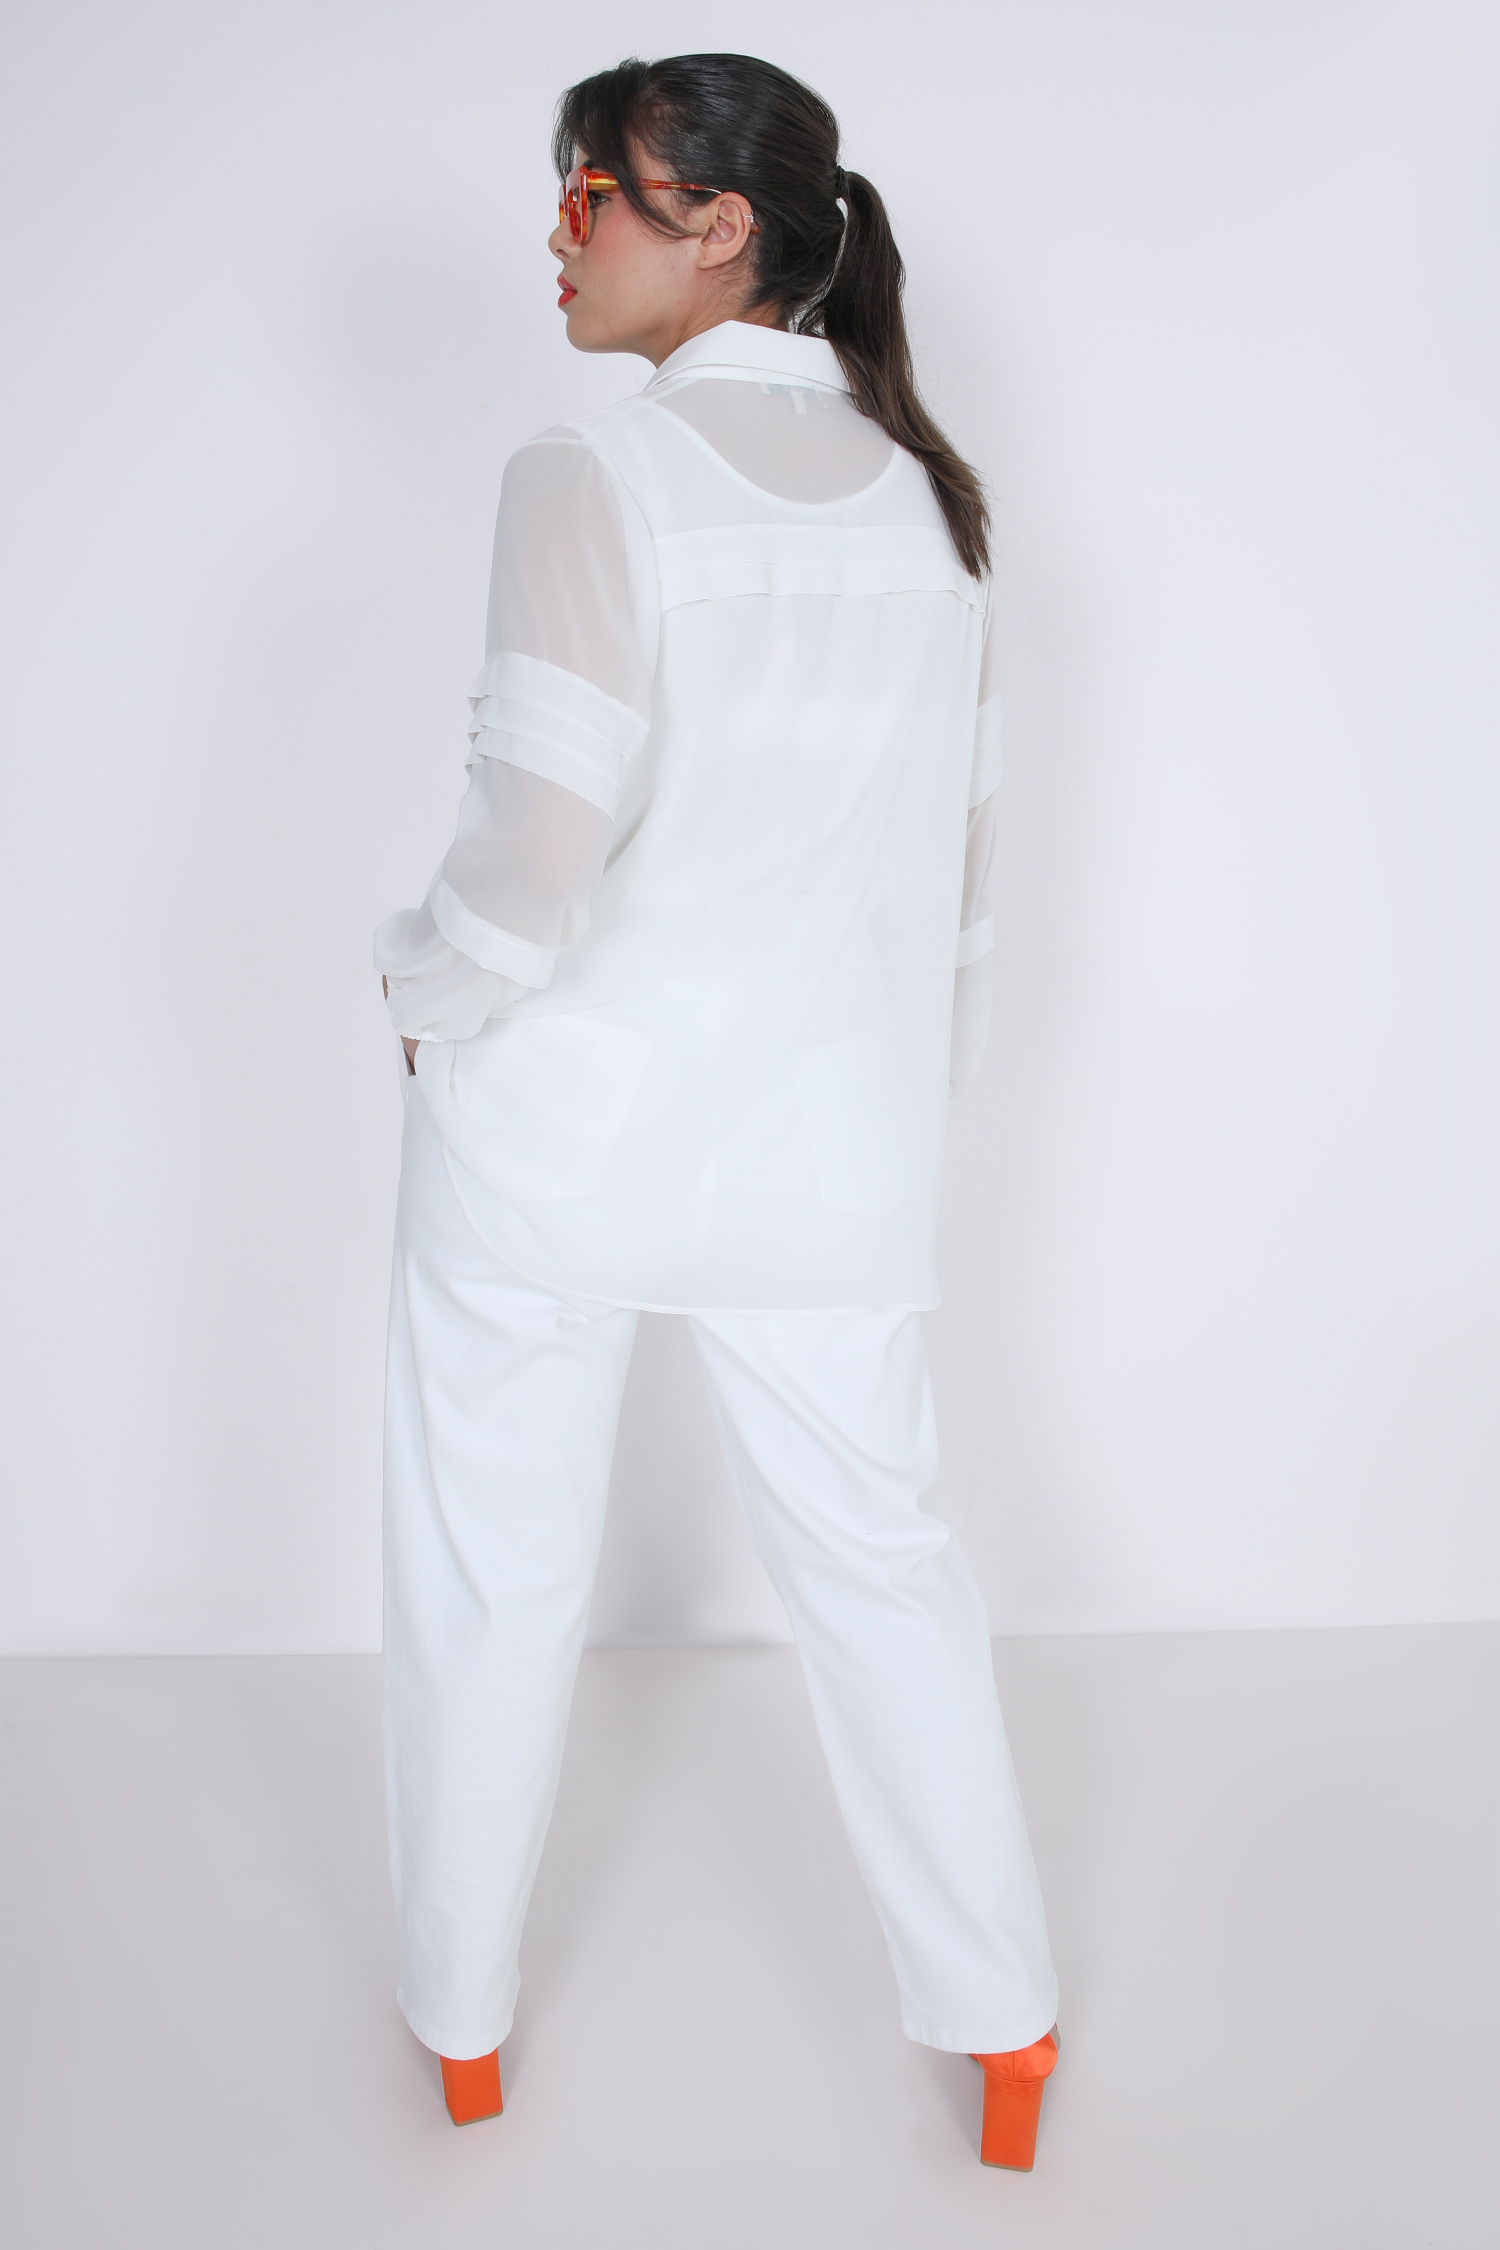 Plain voile shirt with a top underneath